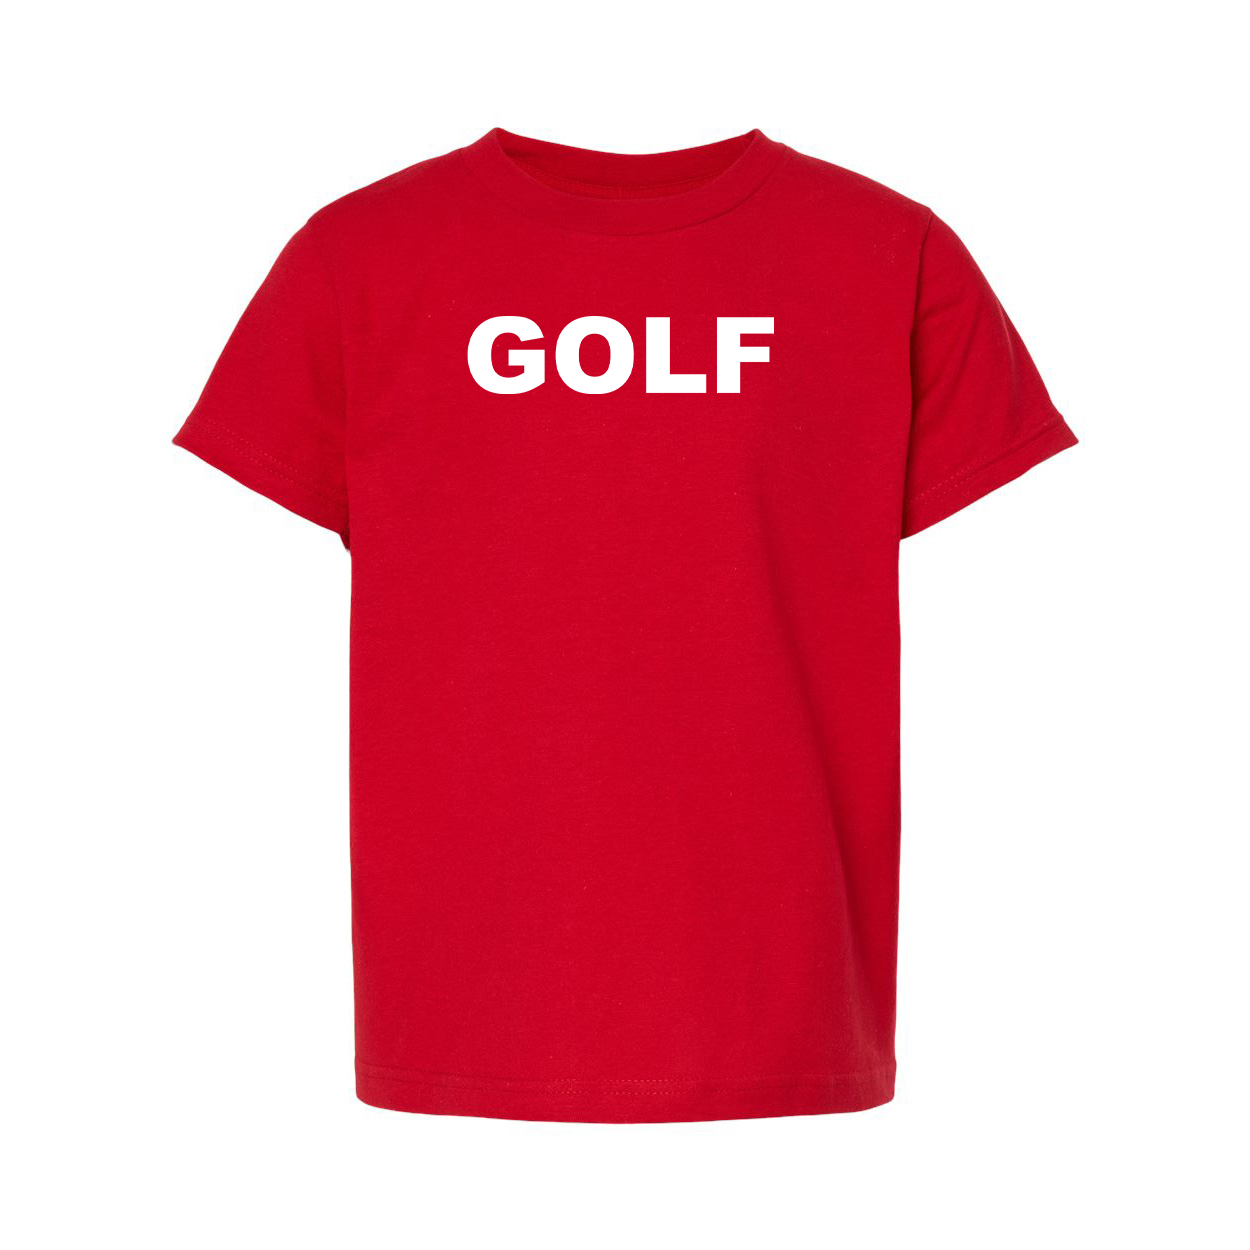 Golf Brand Logo Classic Youth Unisex T-Shirt Red 